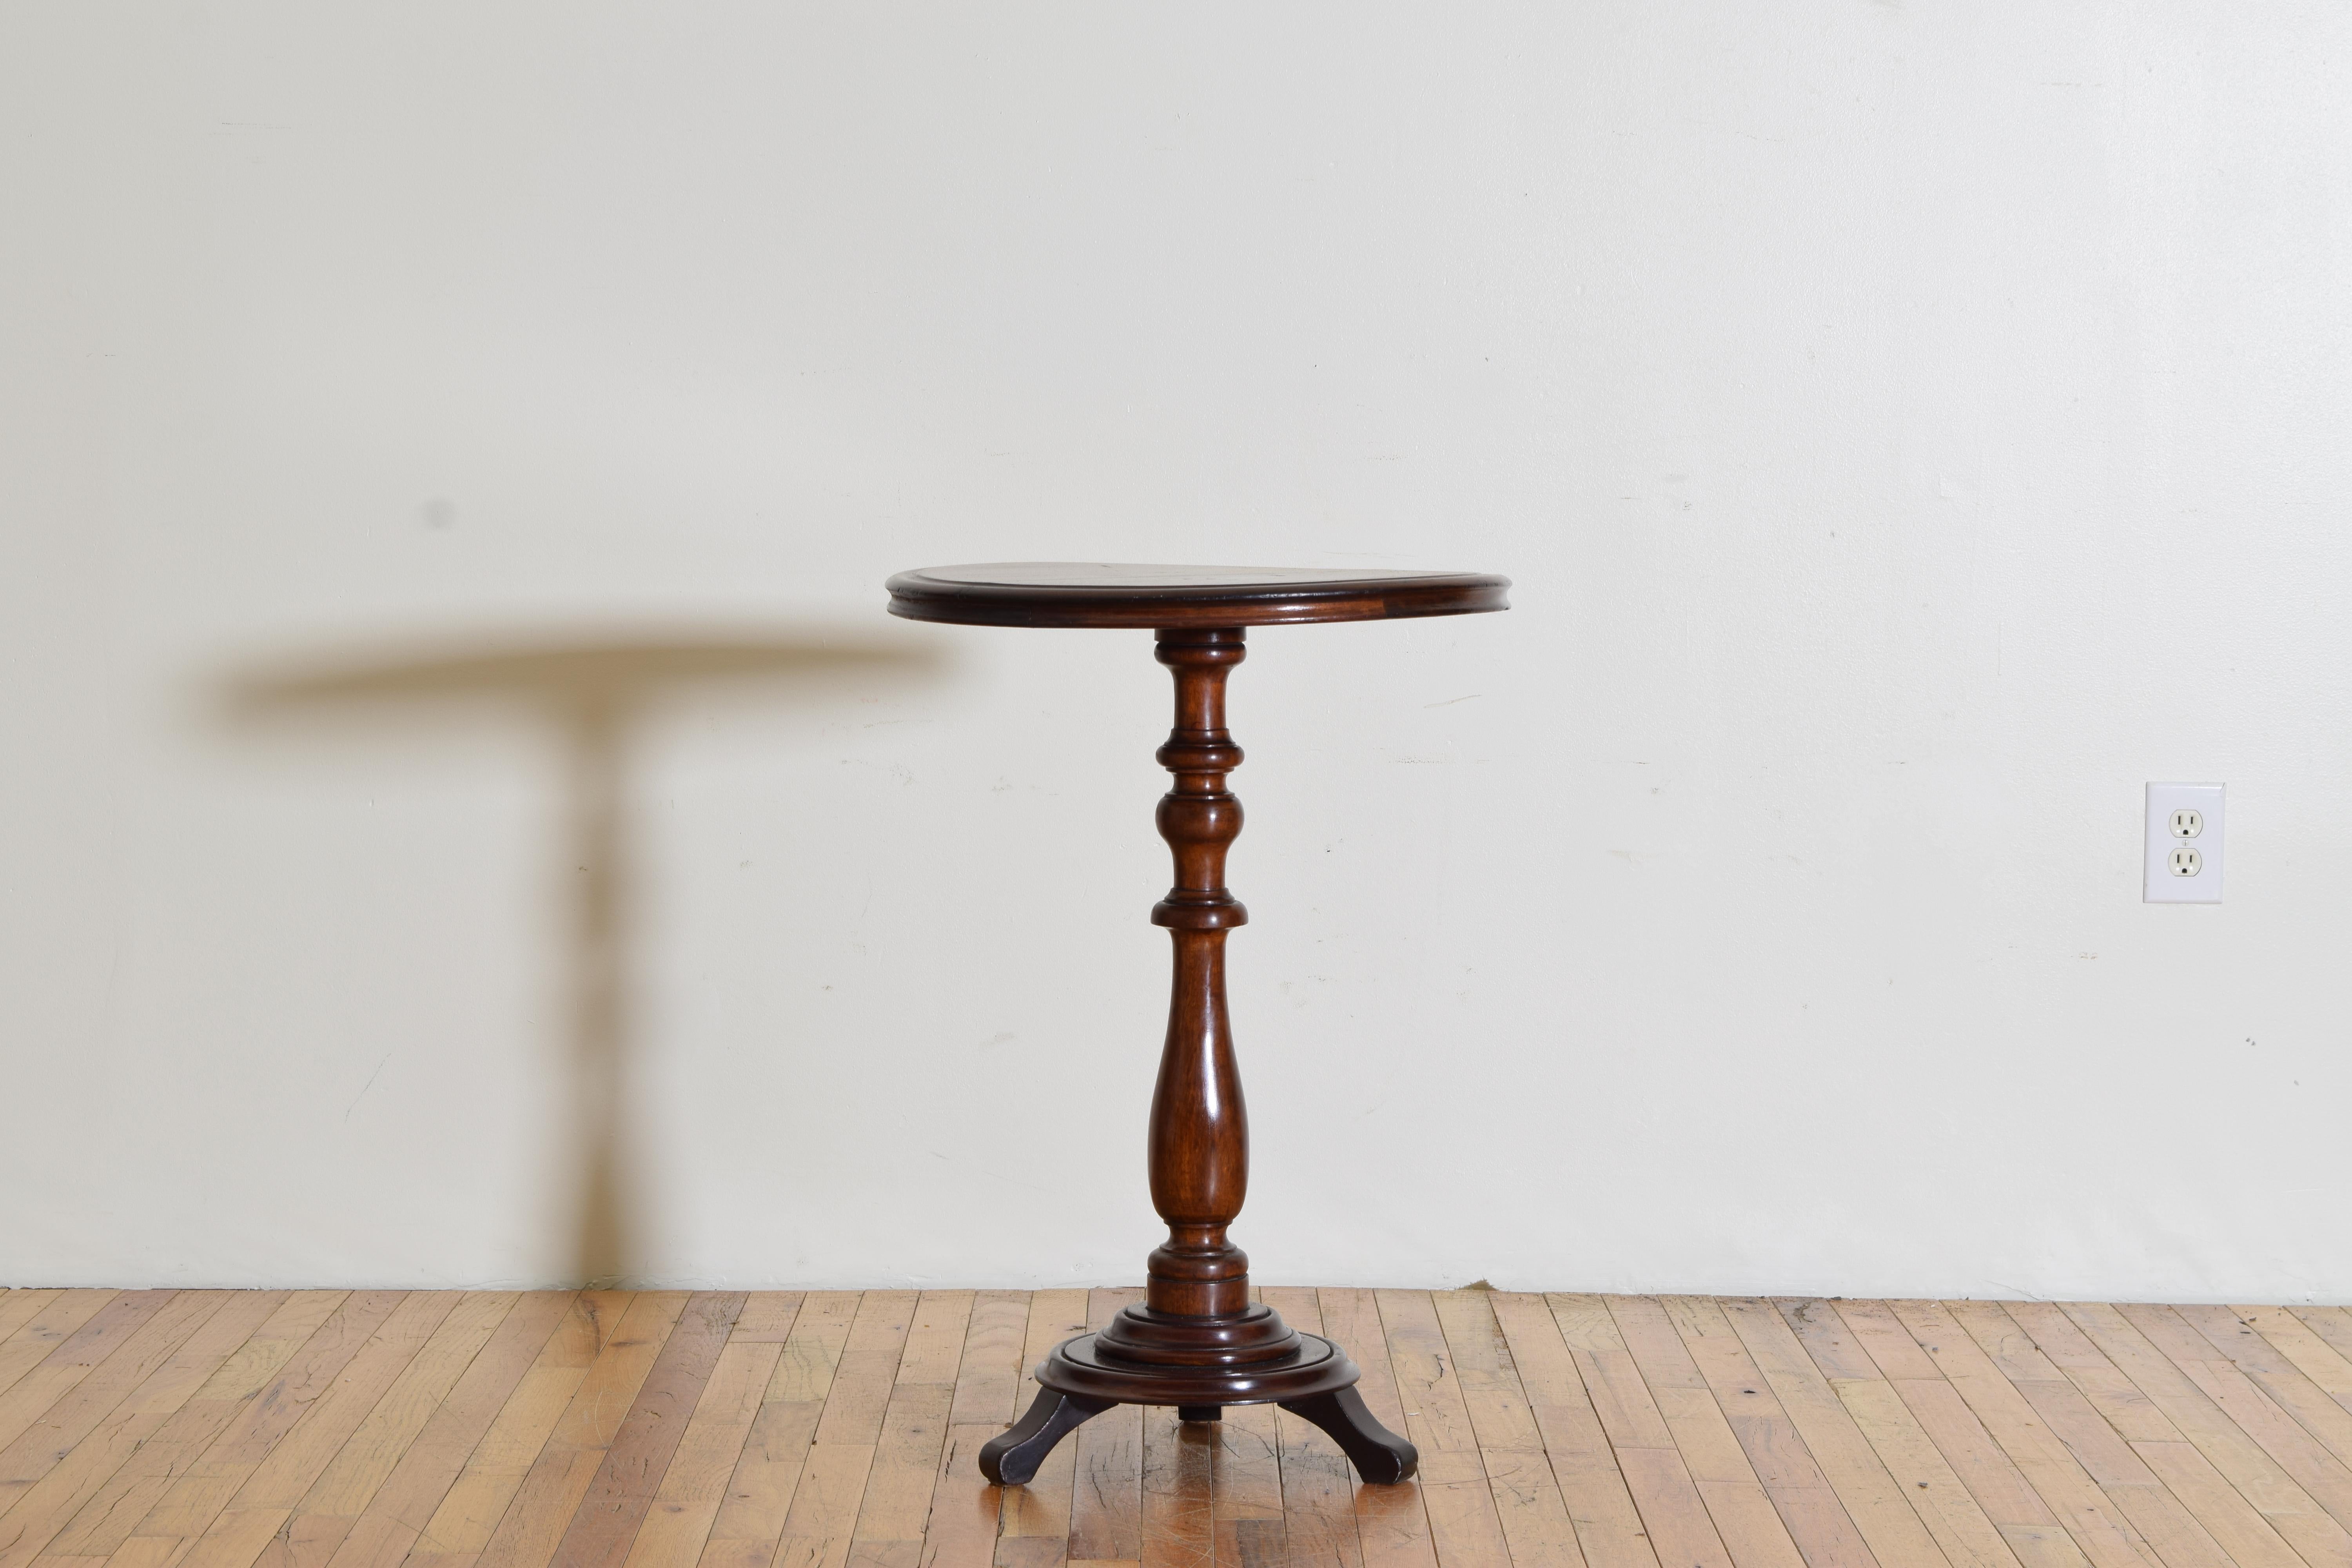 Neoclassical Italian Neoclassic Turned and Shaped Walnut Circular Table, ca. 1835 For Sale